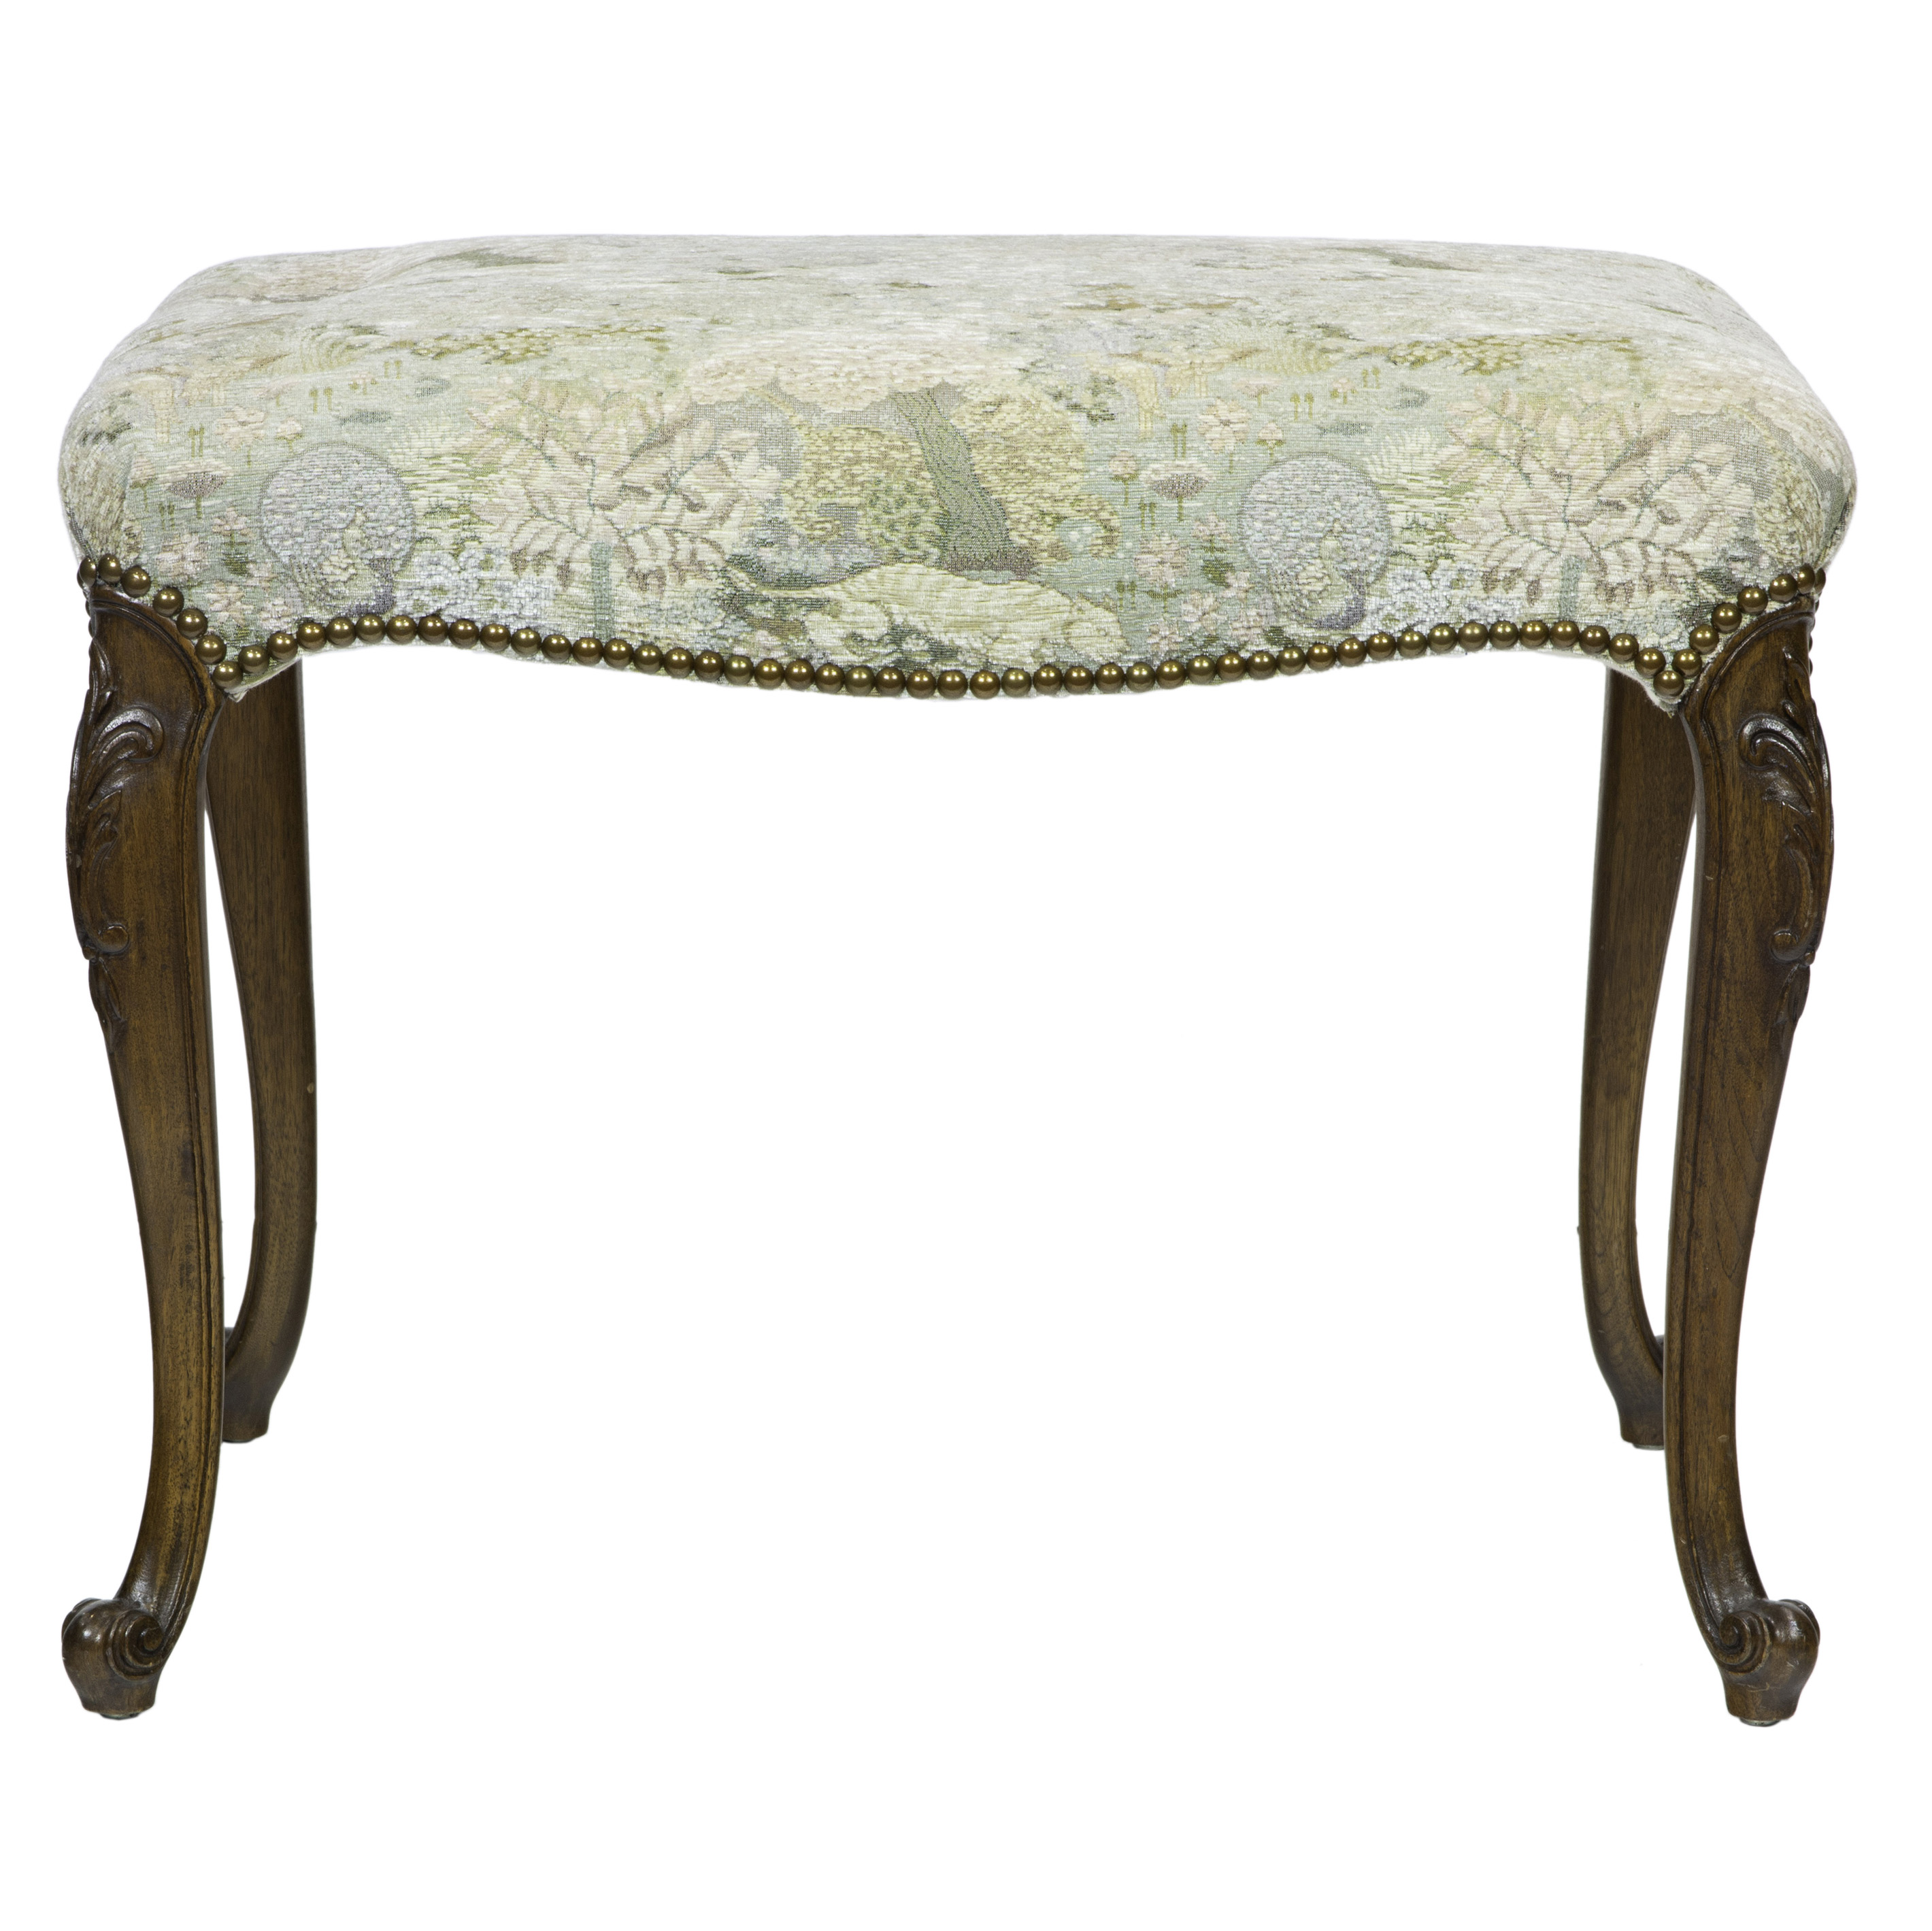 FRENCH UPHOLSTERED OTTOMAN French 3a4271